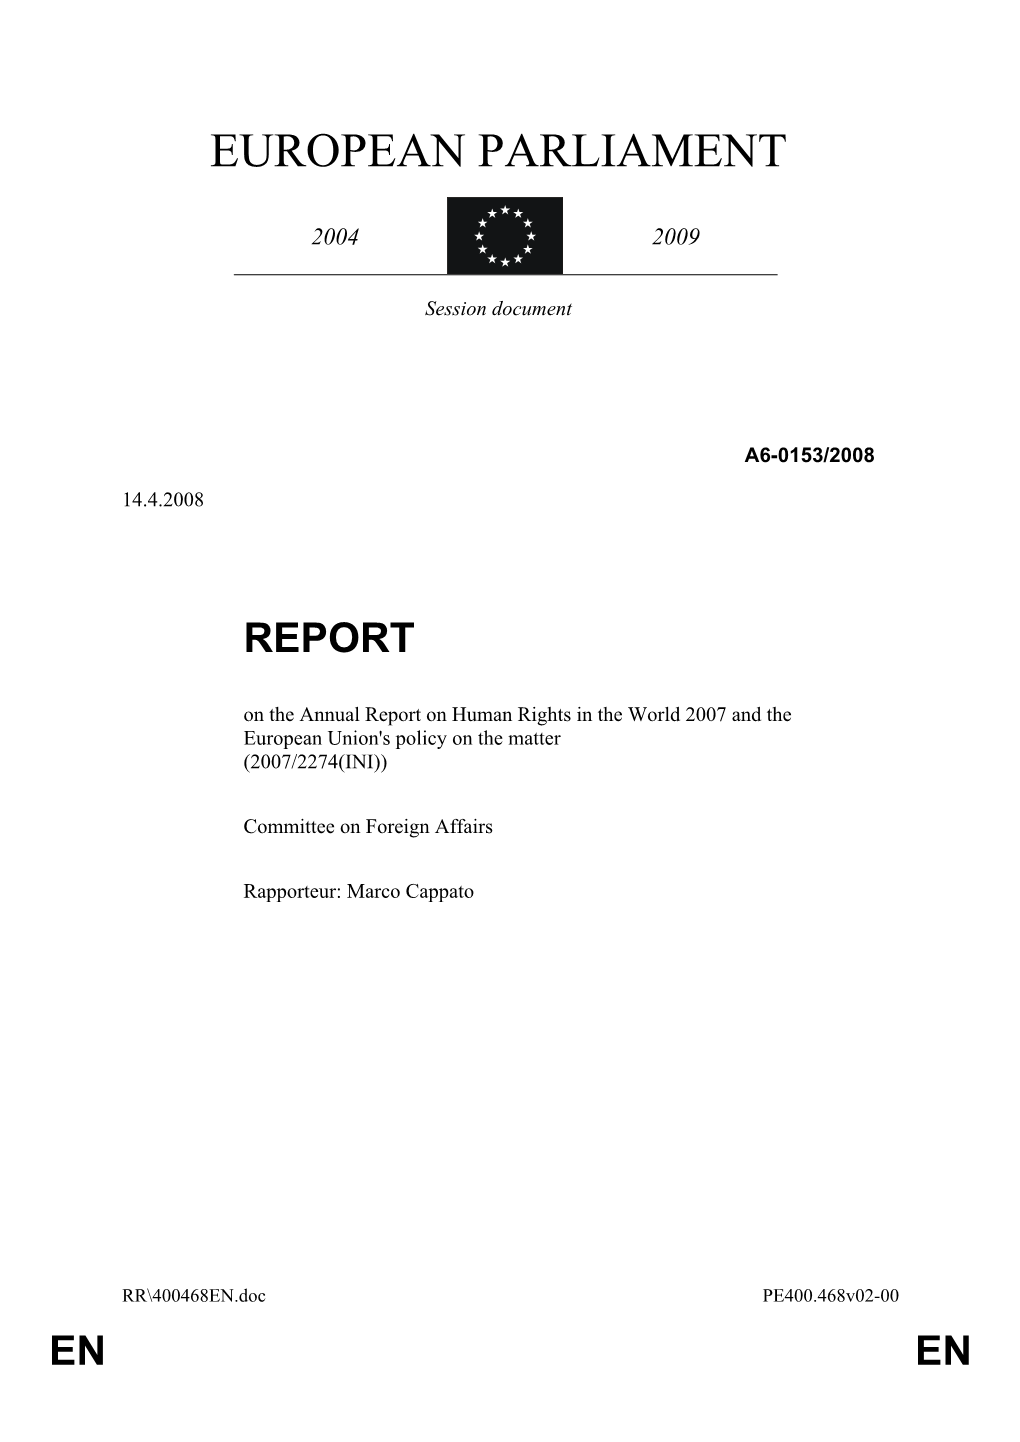 Annual Report on Human Rights in the World 2007 and the European Union's Policy on the Matter (2007/2274(INI))